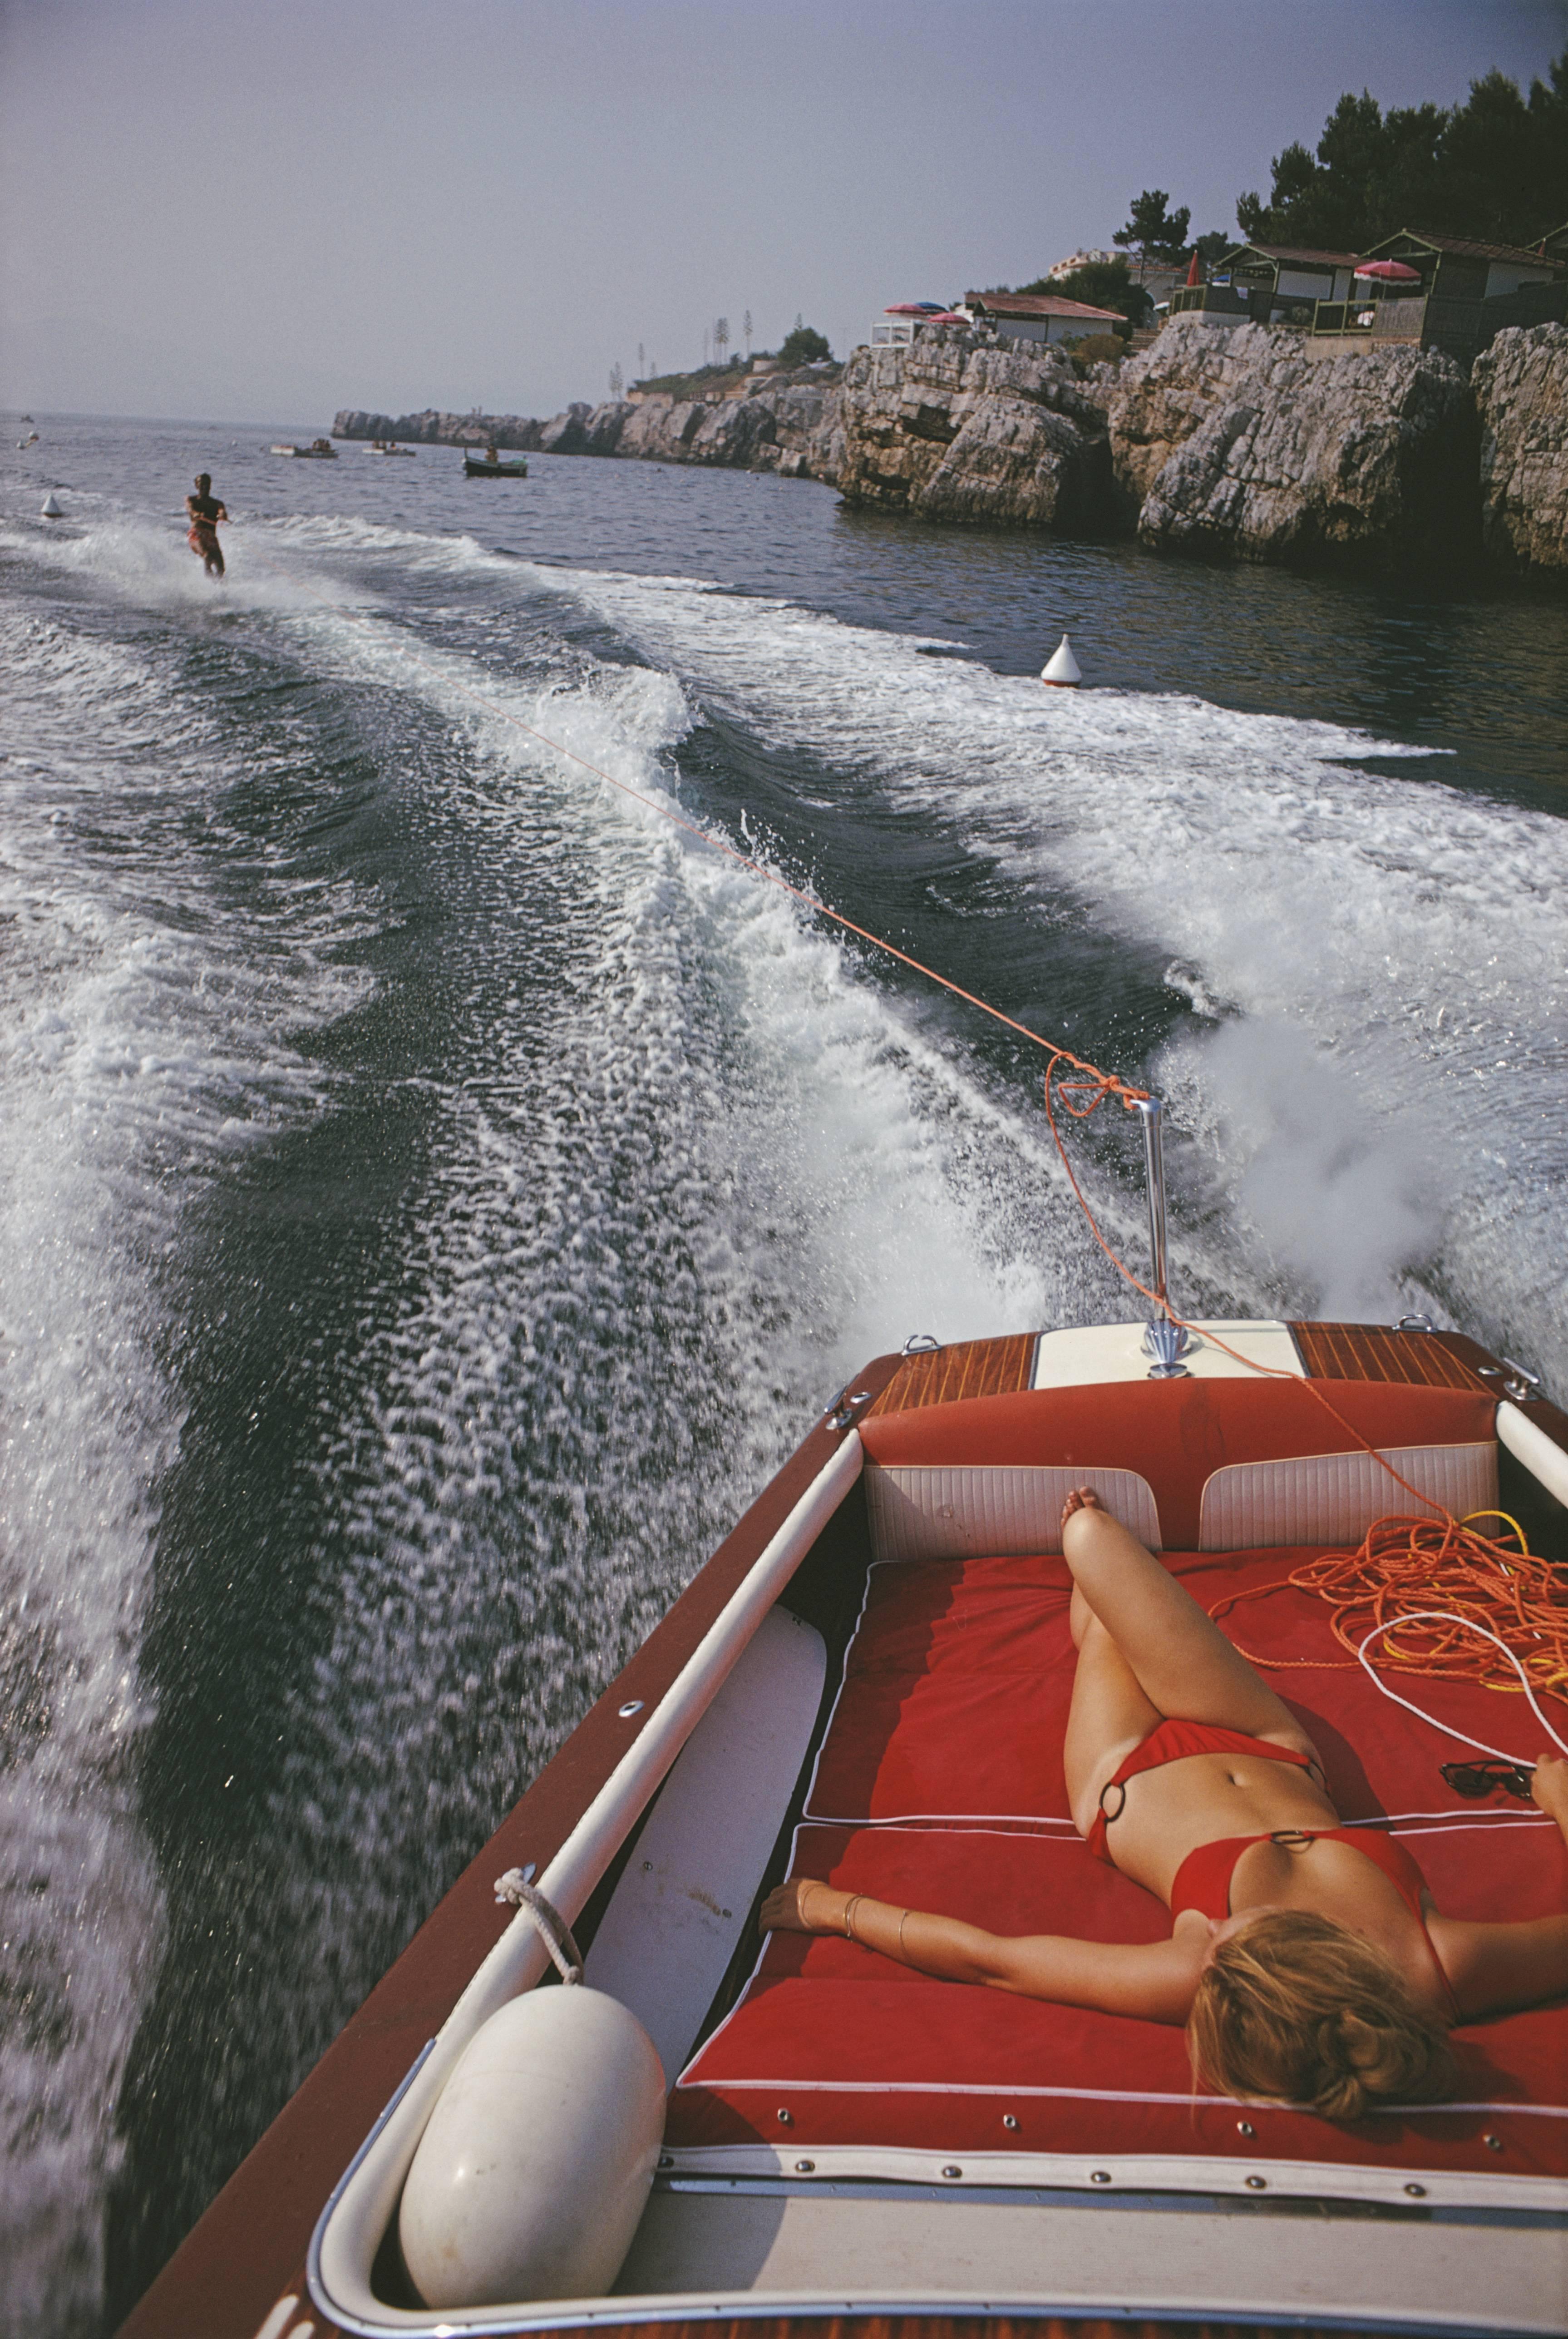 A woman sunbathing in a motorboat as it tows a waterskiier, in the sea off the Hotel du Cap-Eden-Roc in Antibes on the French Riviera, August 1969.

C-type print from the original transparency held at the Getty Images Archive, London.  Numbered and